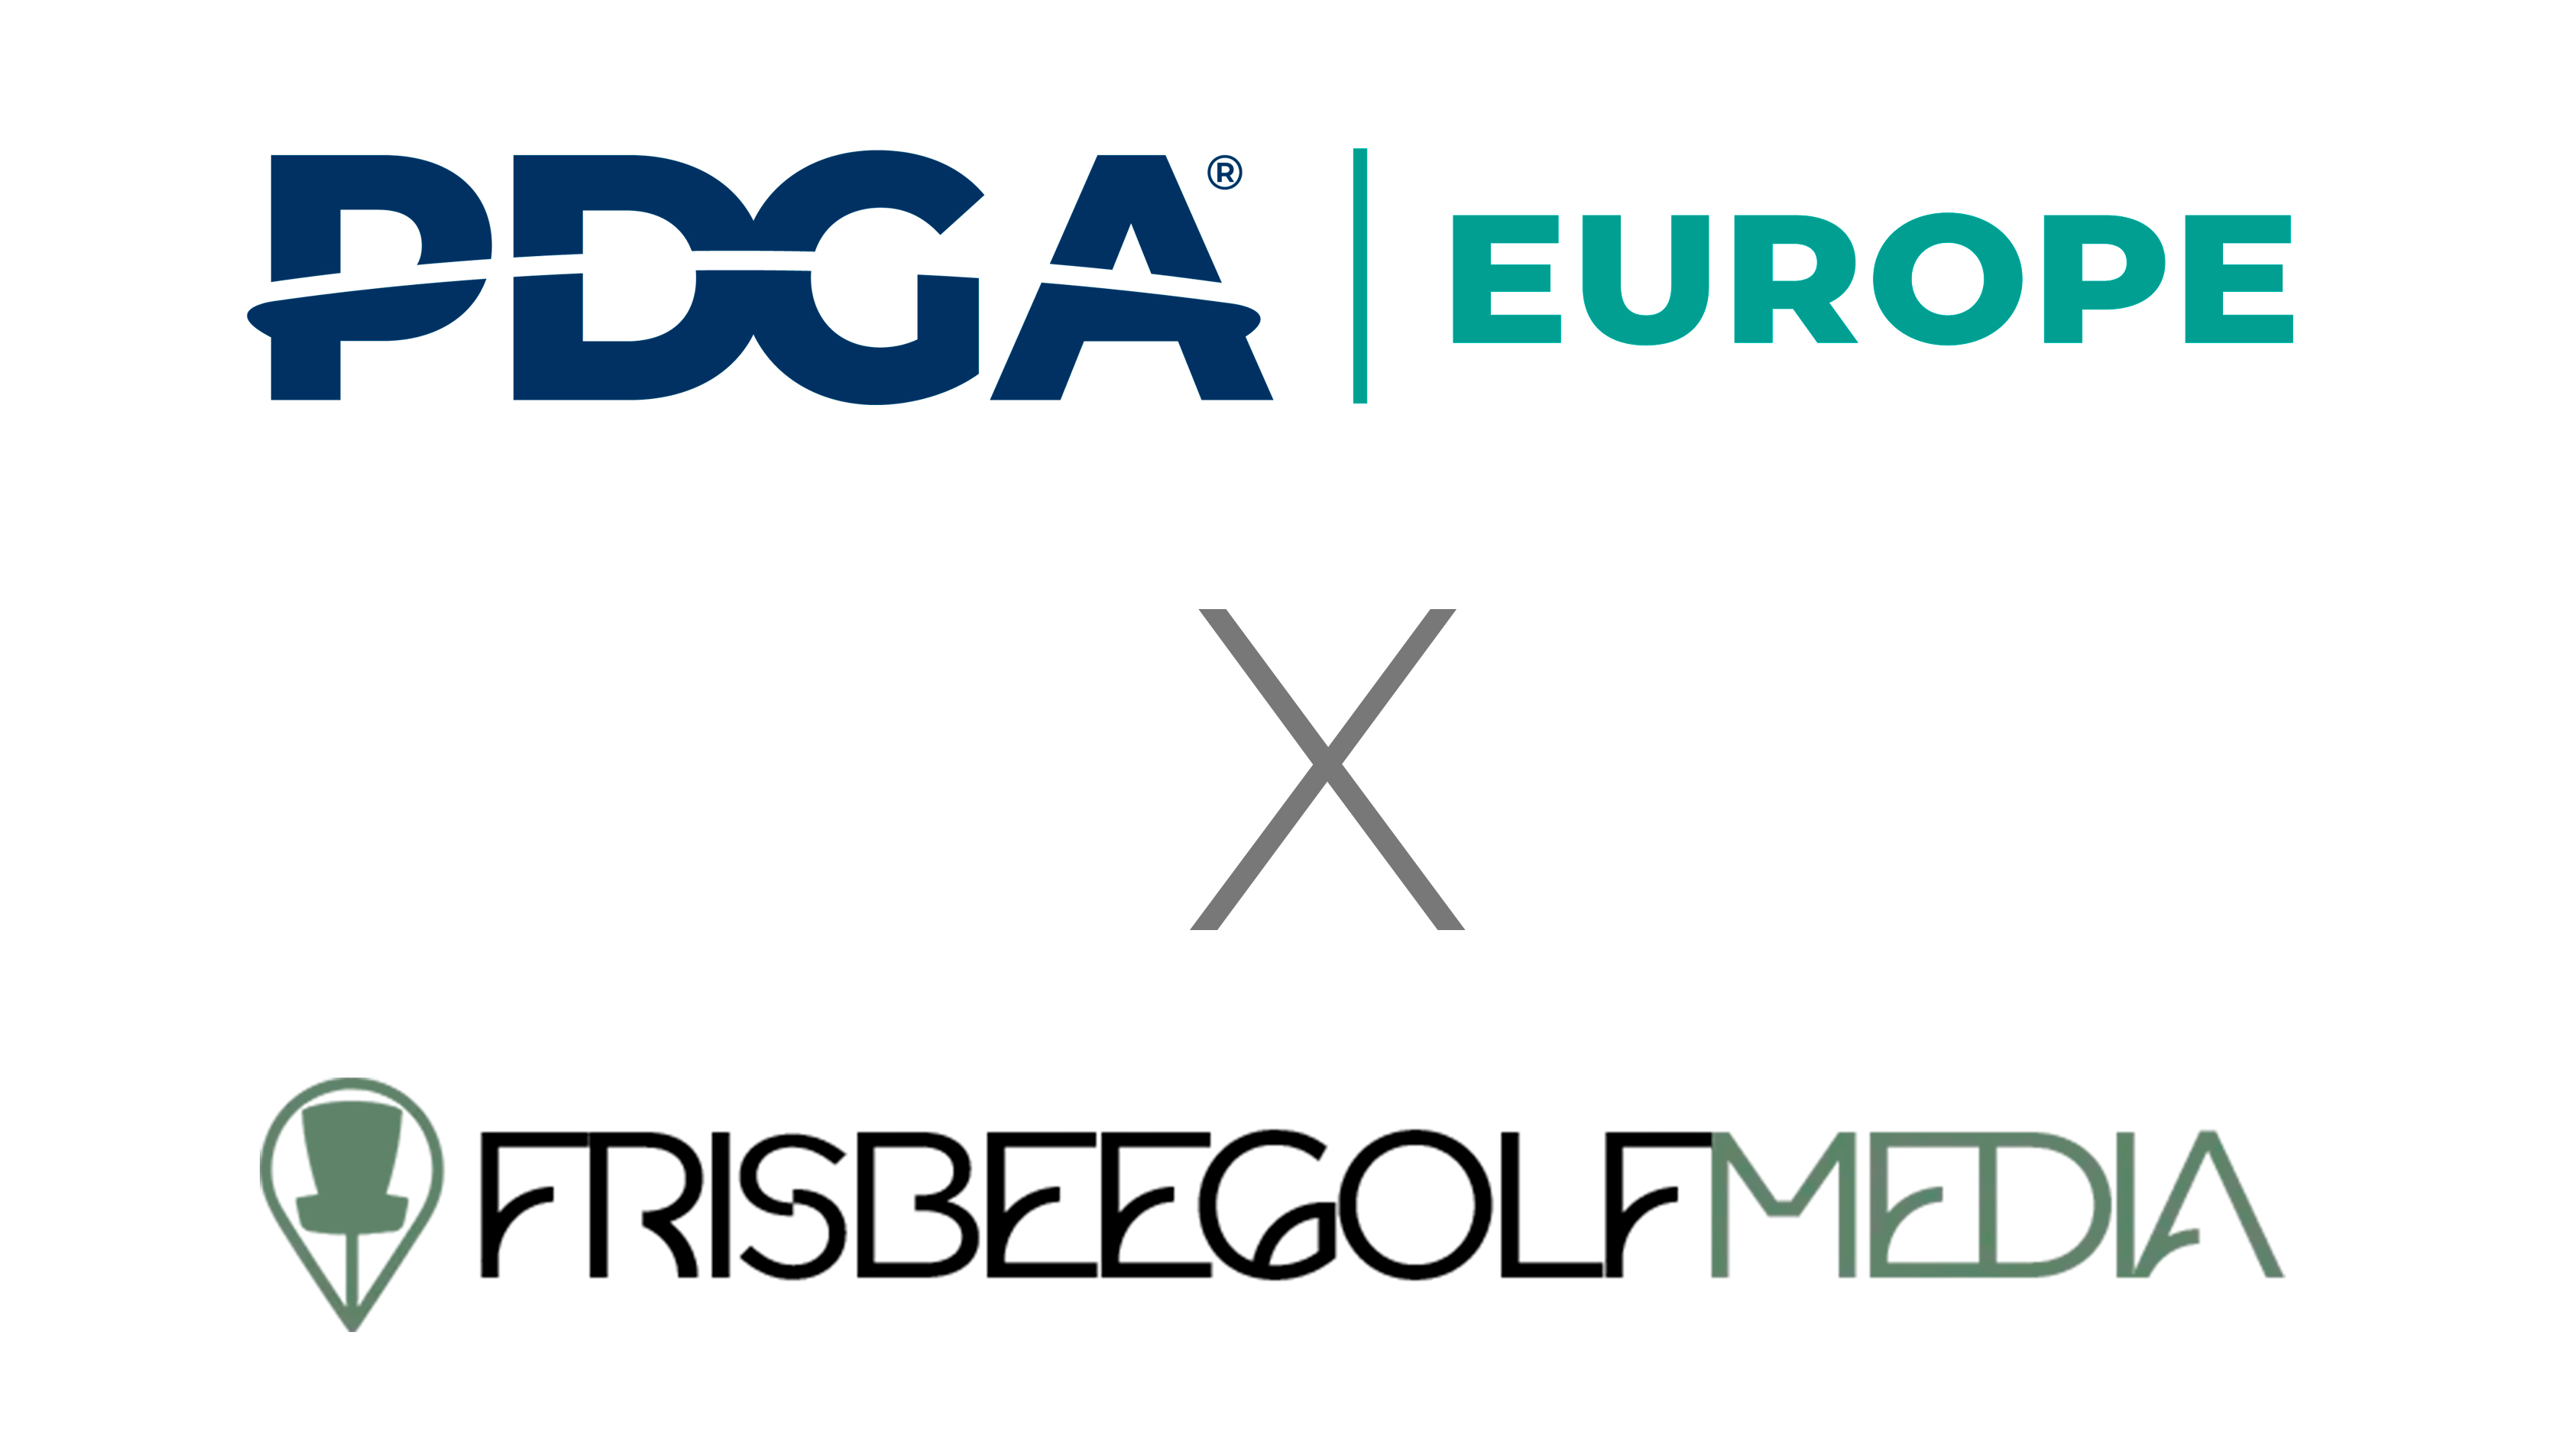 Frisbeegolfmedia Official Press Agency of PDGA Europe in Finland in